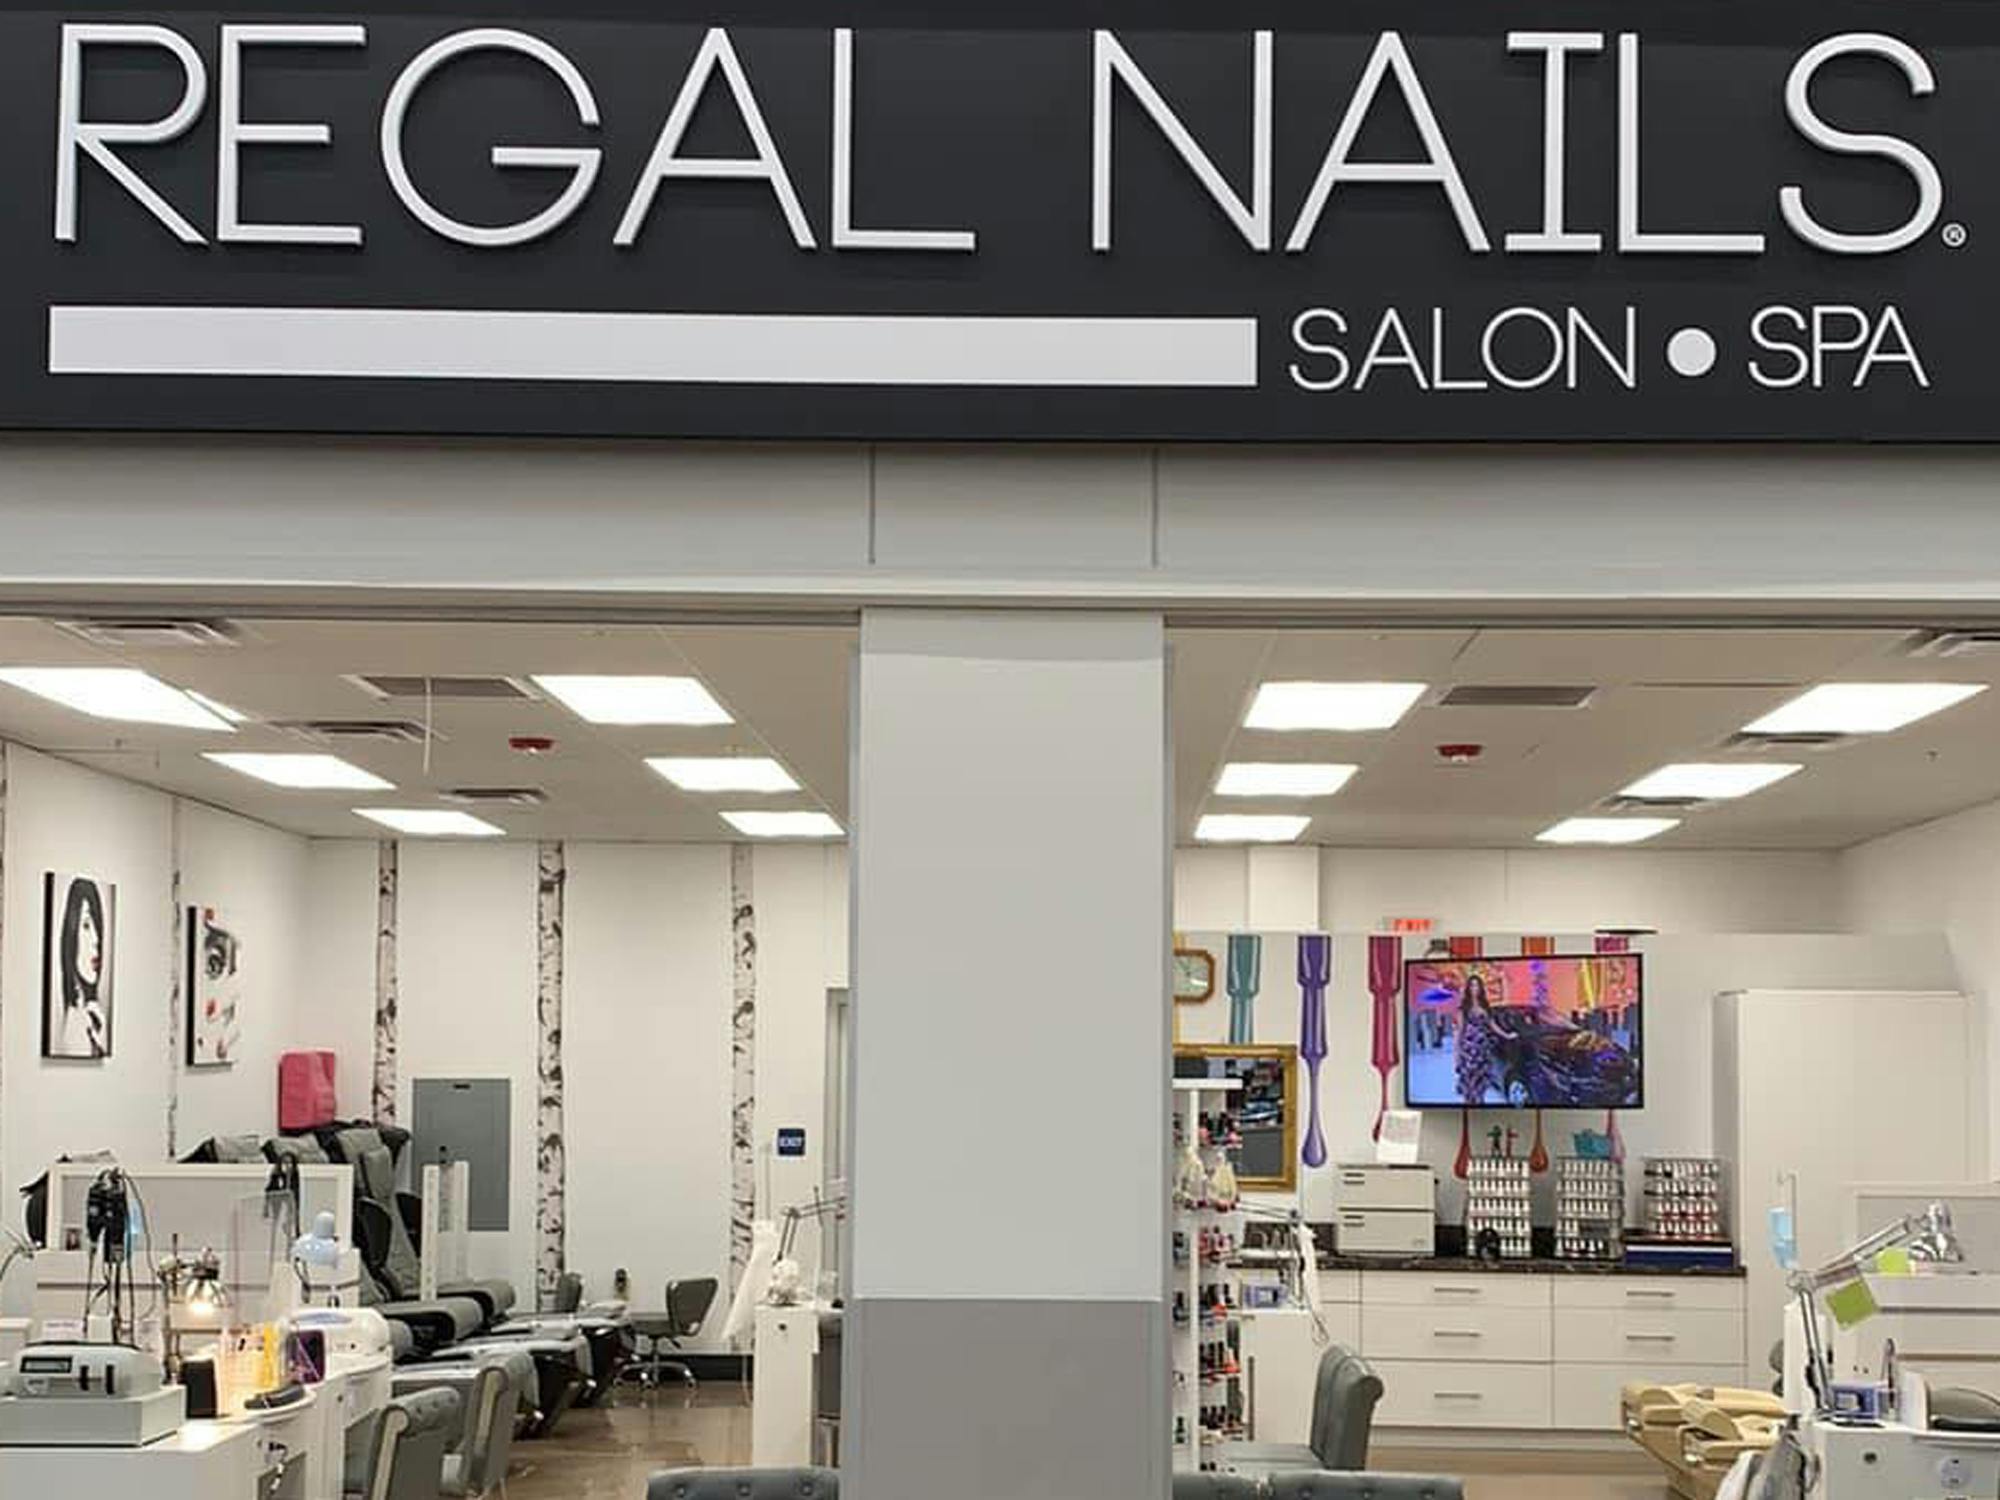 you can get your nails done at walmart regal nails 1681237432 1681237432